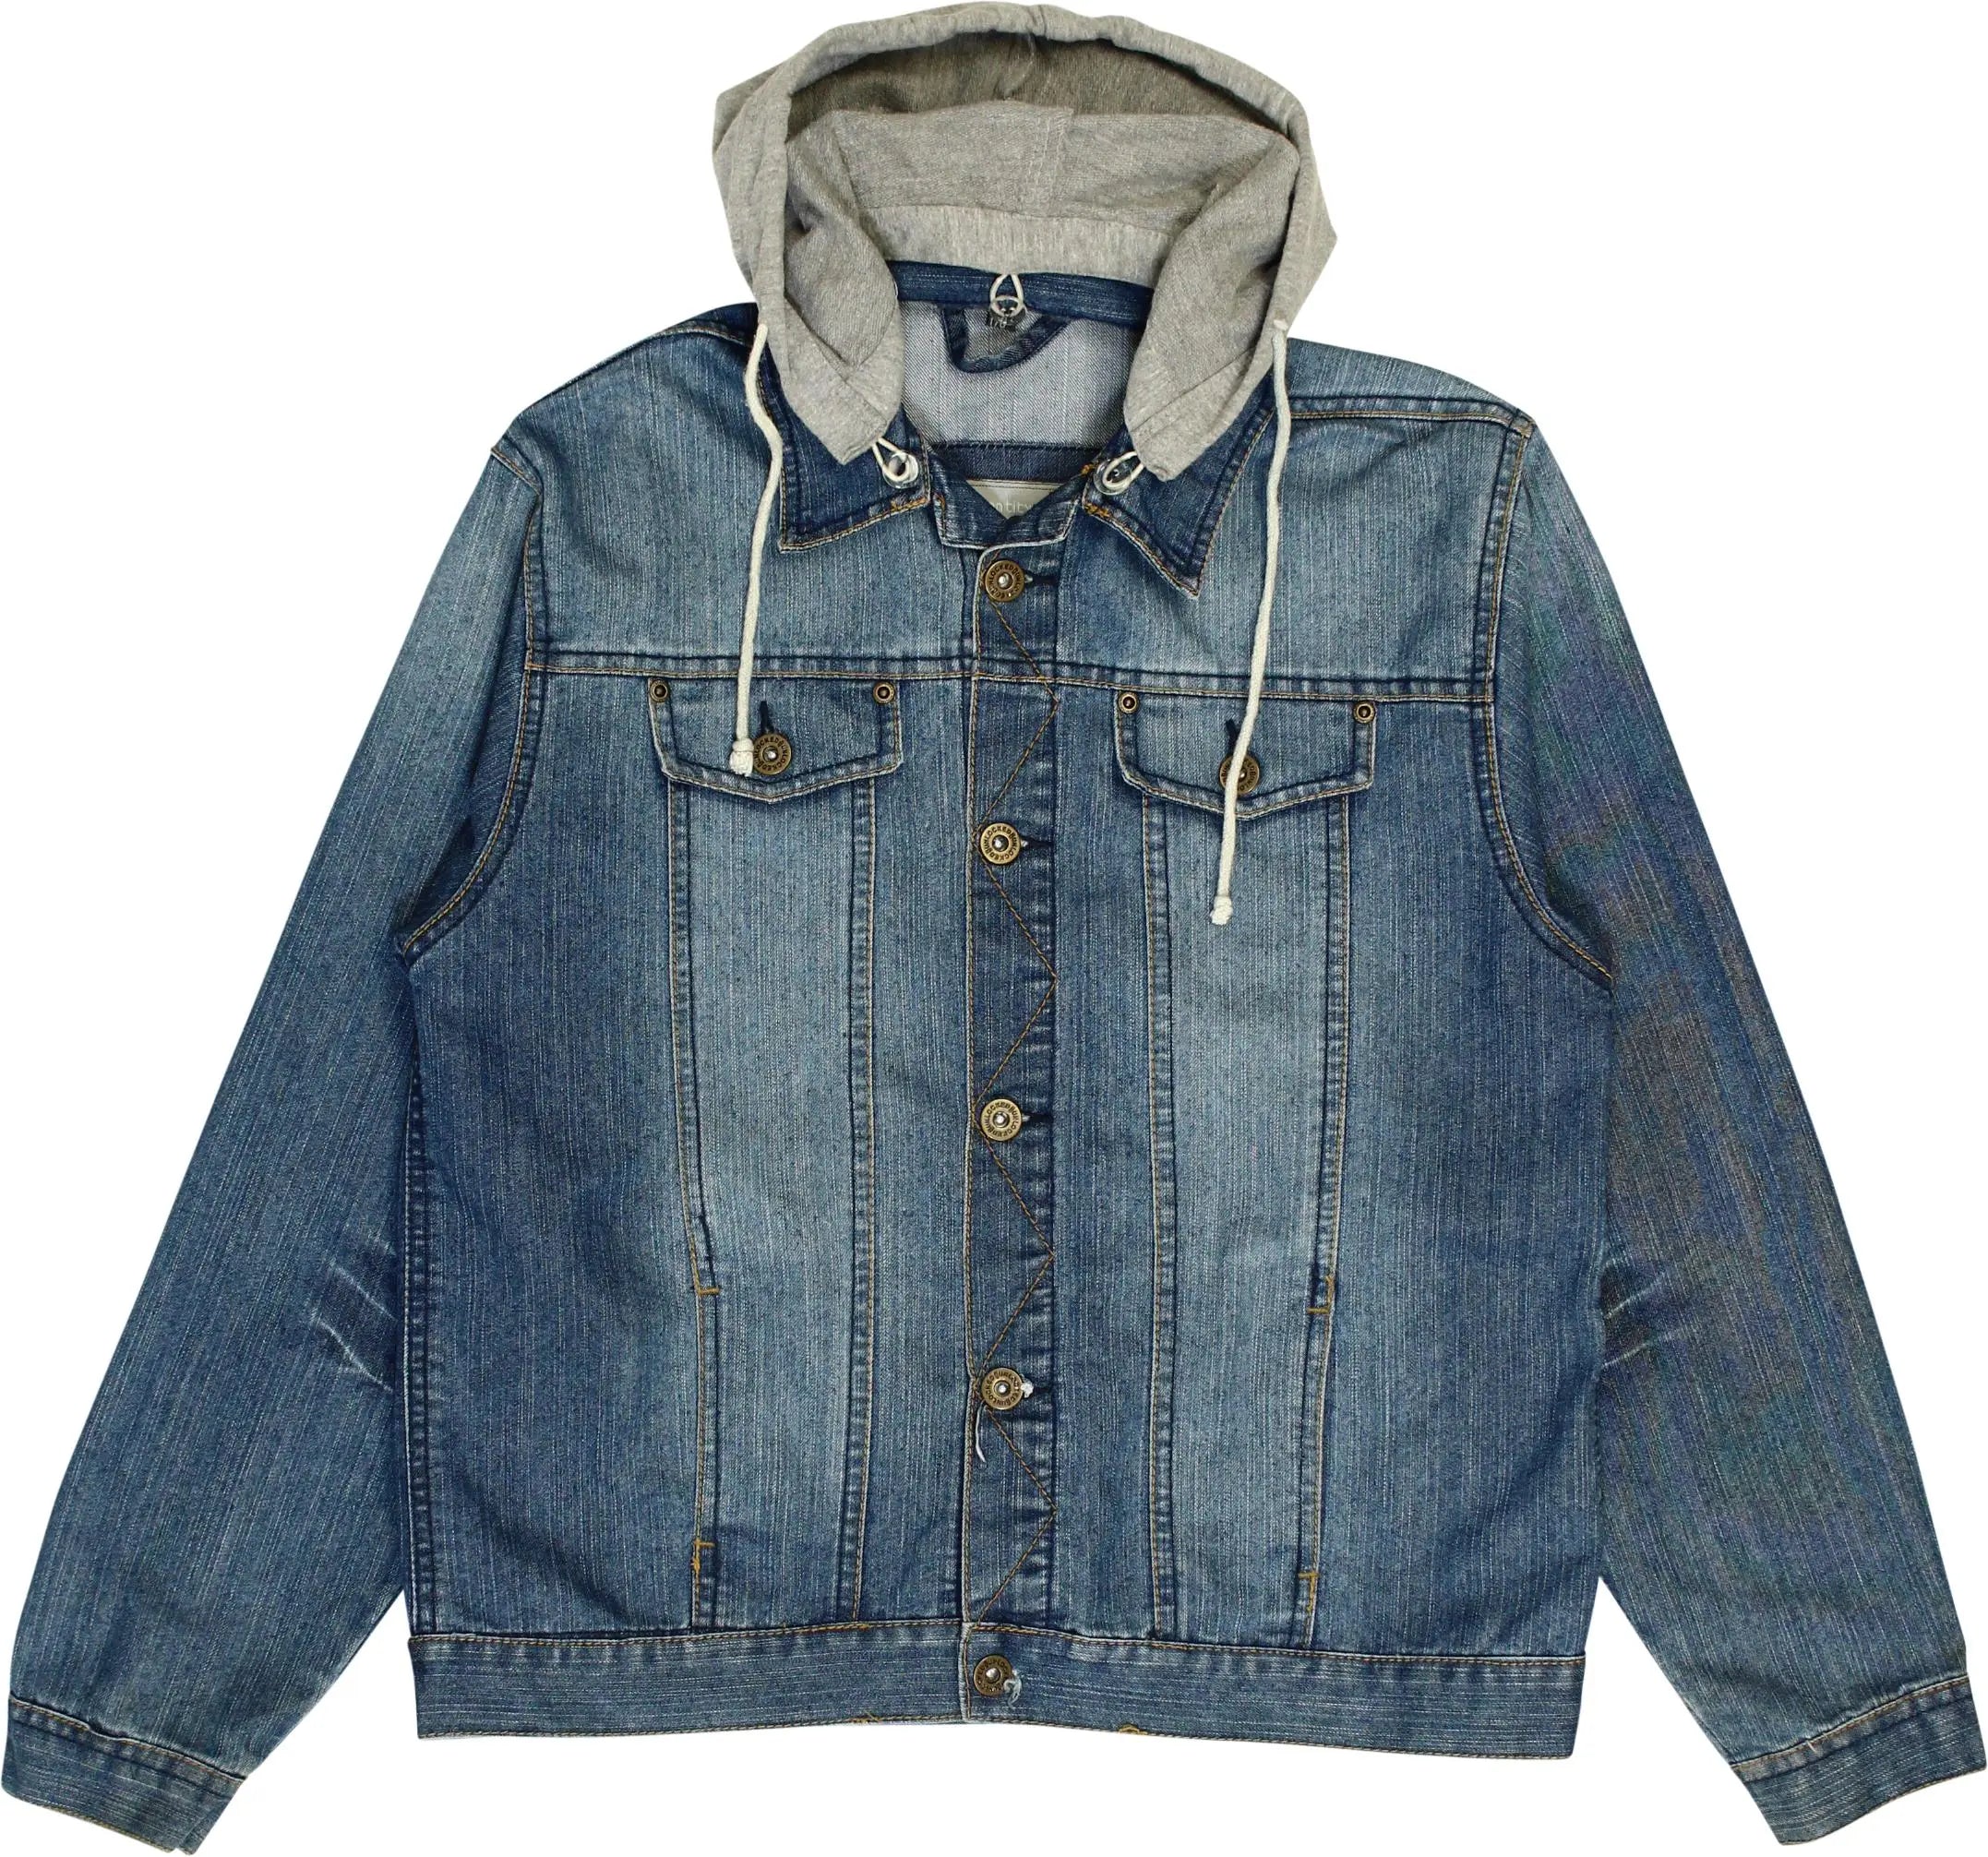 Unknown - Denim Jacket with Hood- ThriftTale.com - Vintage and second handclothing